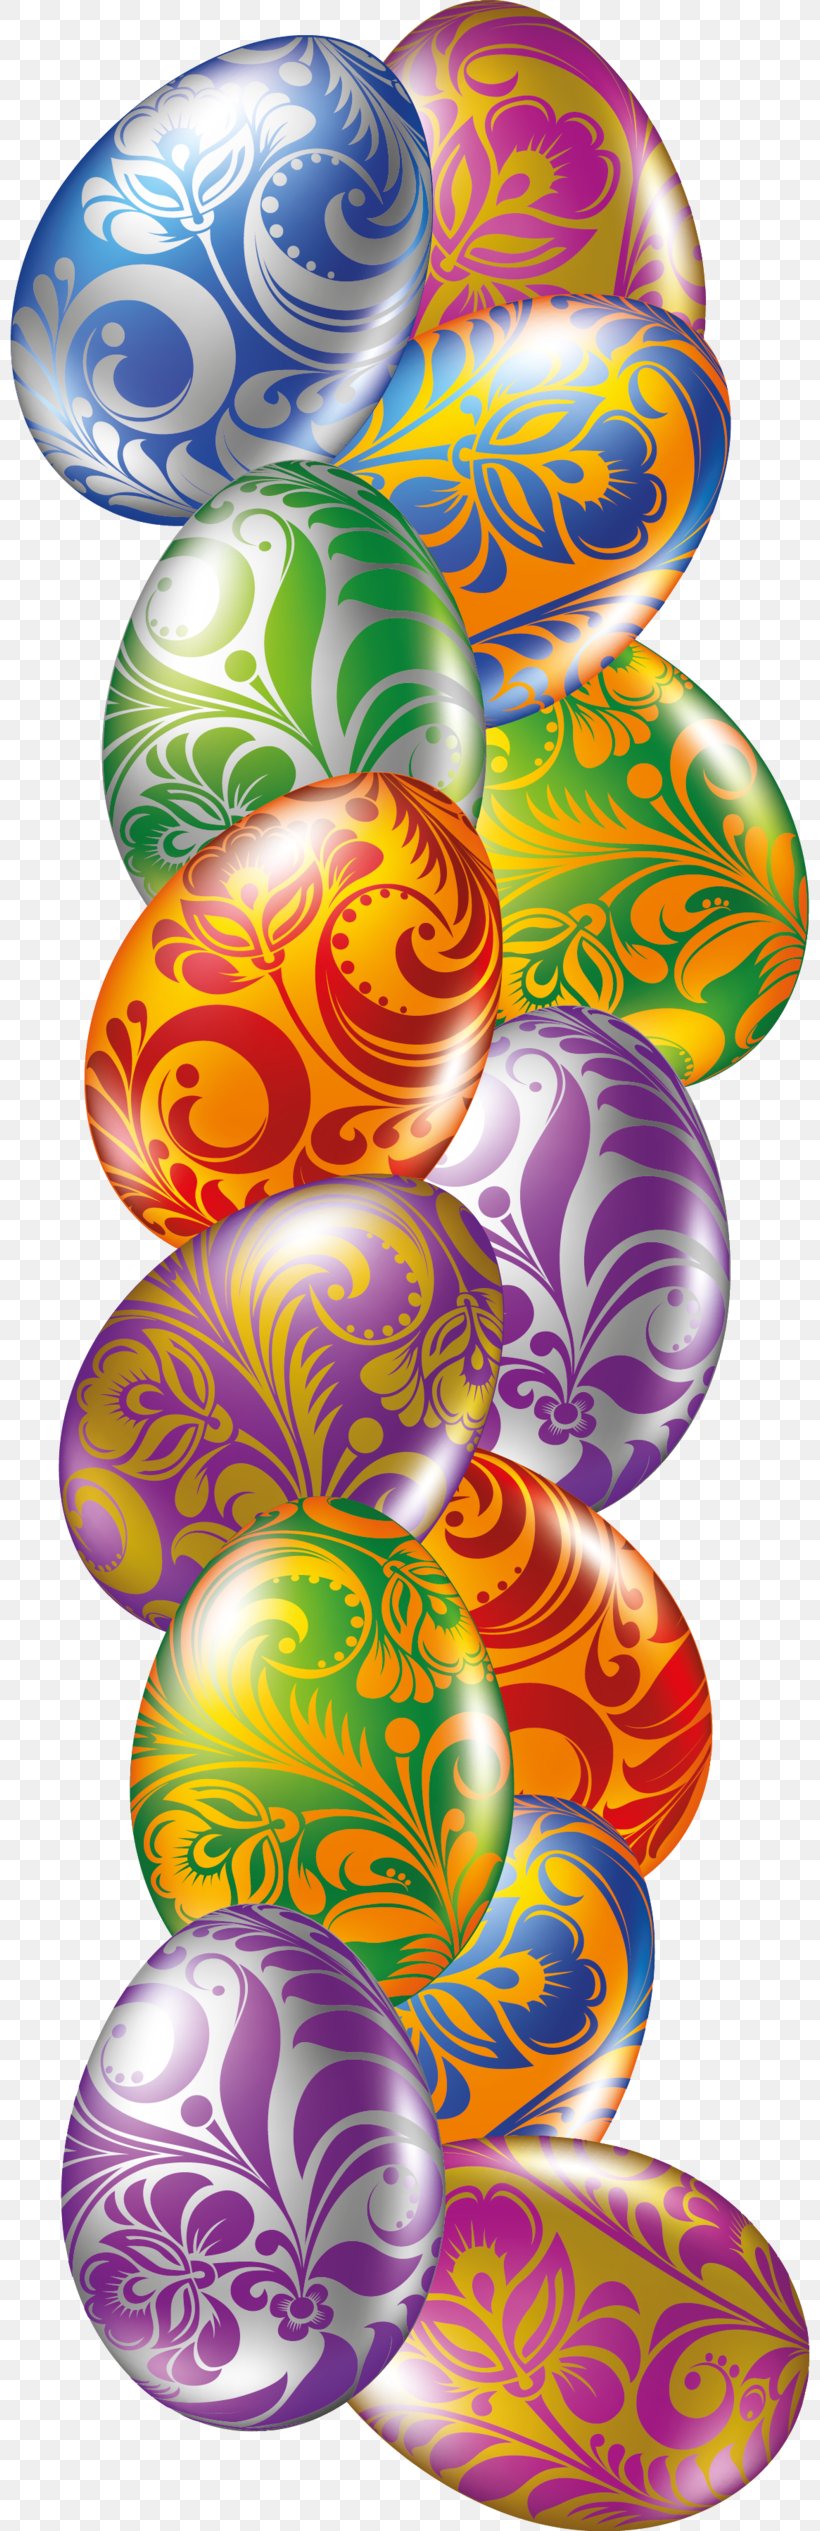 Easter Bunny Easter Egg Easter Parade, PNG, 800x2531px, Easter, Art, Easter Bunny, Easter Egg, Easter Parade Download Free